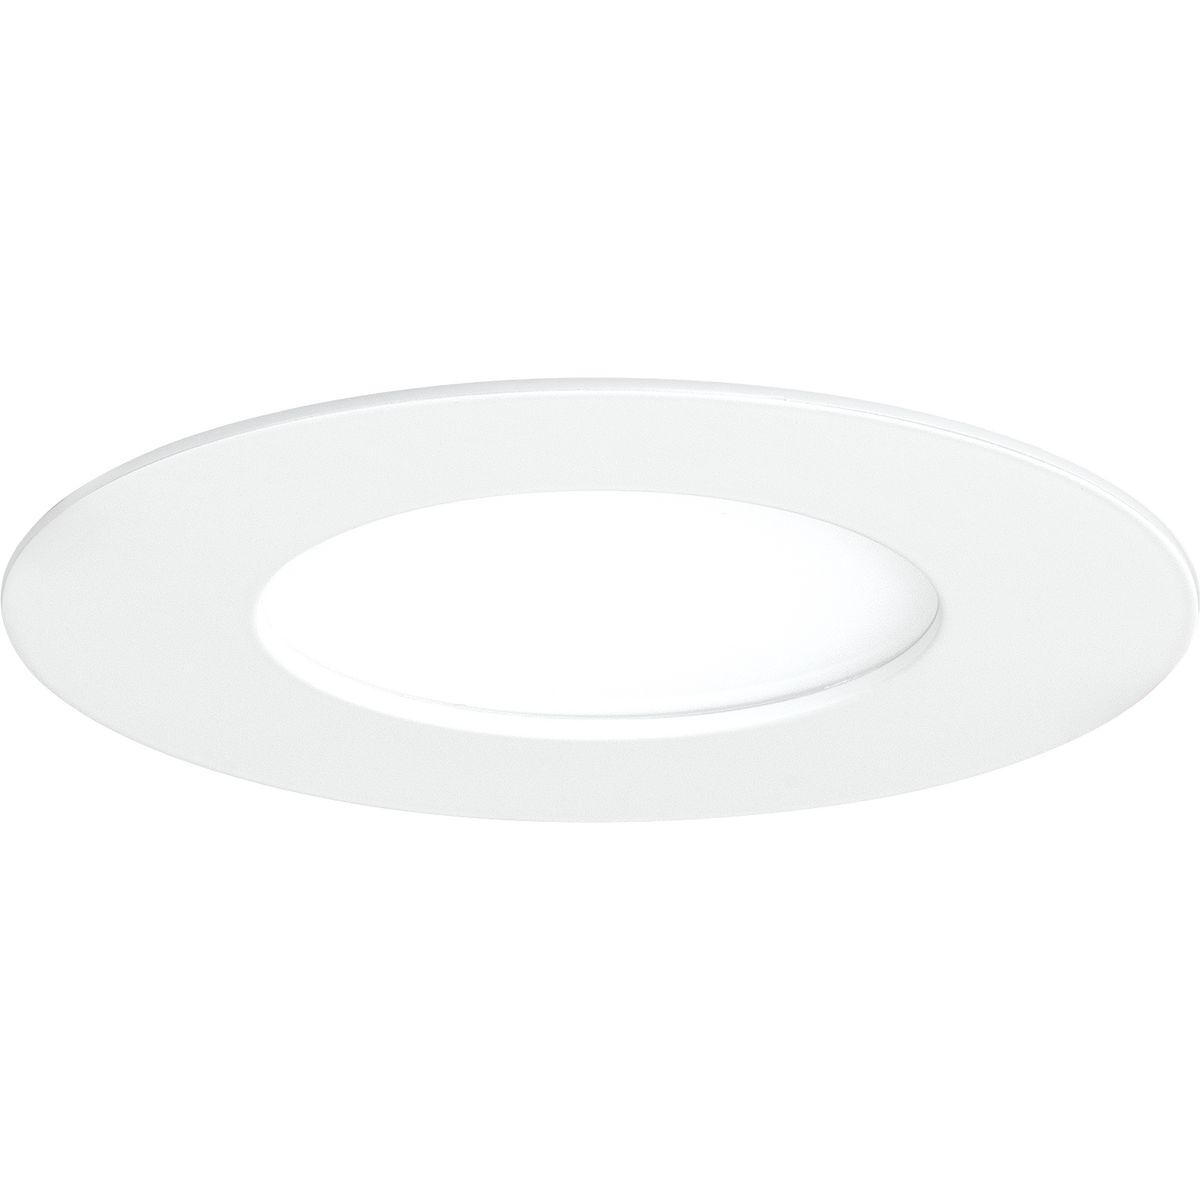 Hubbell P800004-028-30 5" Slim, low profile recessed downlight combines innovative technology, aesthetics, functionality and affordability. No housing or J-Box required for installation and wet location listed provides the ultimate flexibility. The low profile downlight is idea